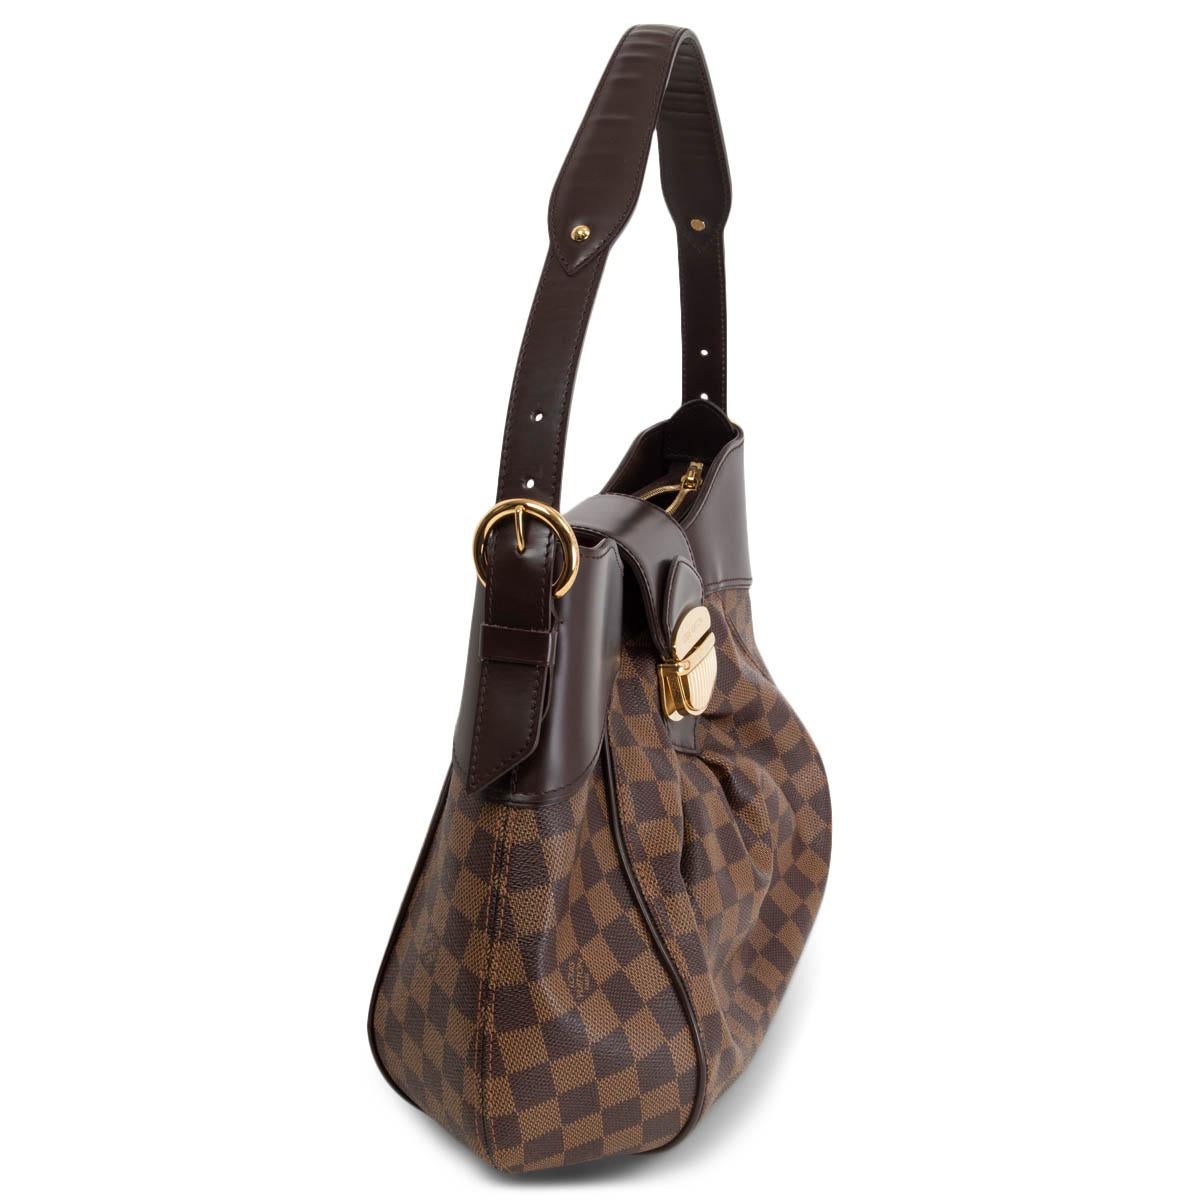 100% authentic Louis Vuitton Sistina MM Hobo Bag in brown and camel Ebene Damier canvas with brown calfskin trimming. Opens with a zipper on top and is lined in red microfibre with two open pockets against the back. The pleated shape with a fold